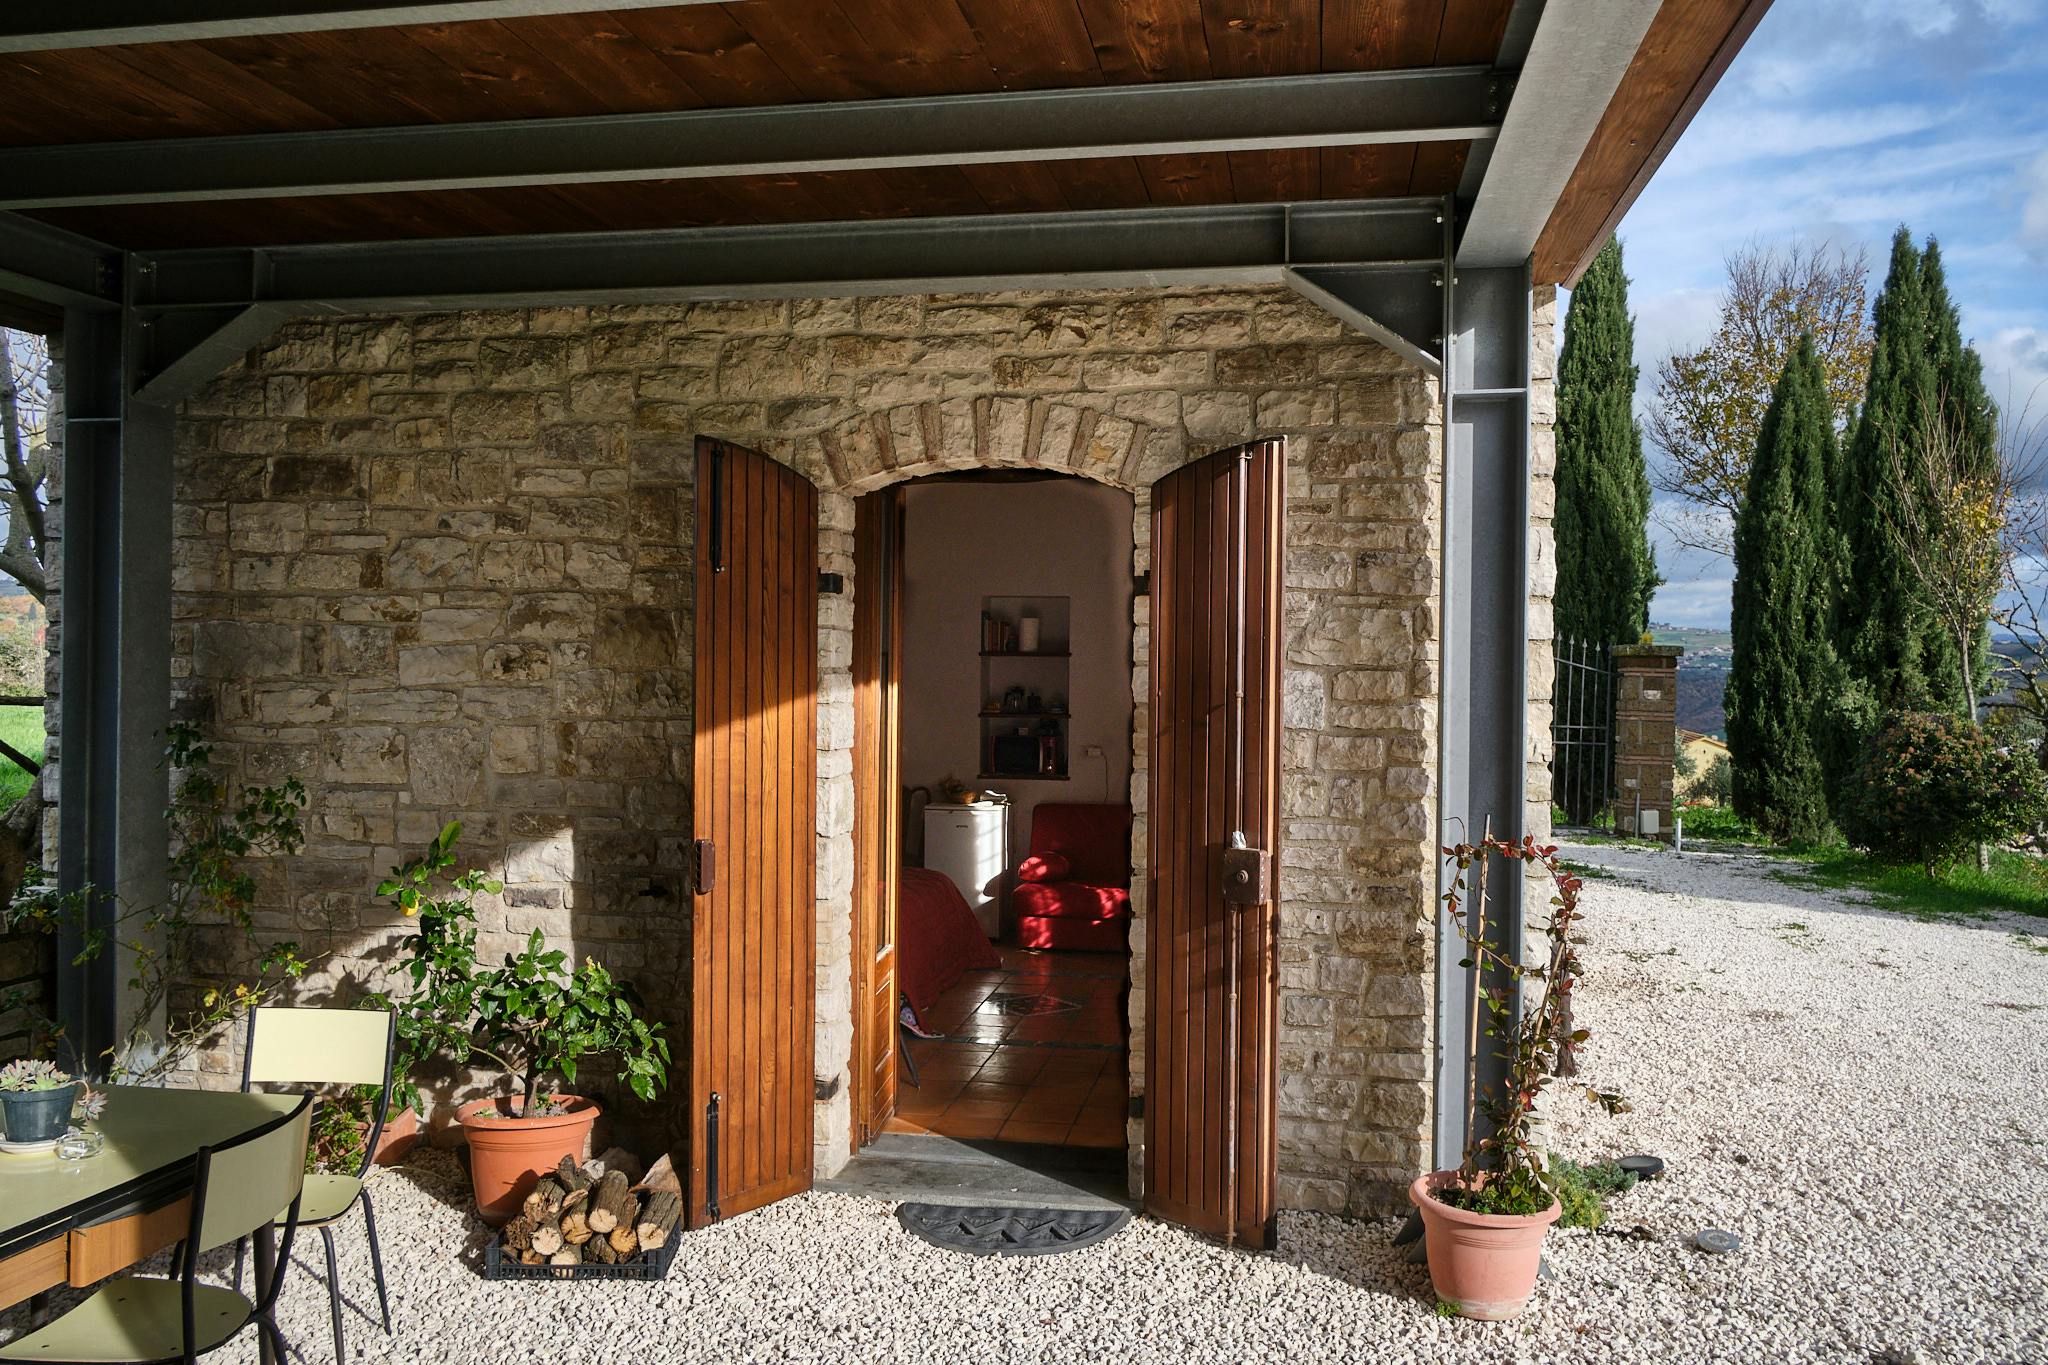 Entrance to the Chalet